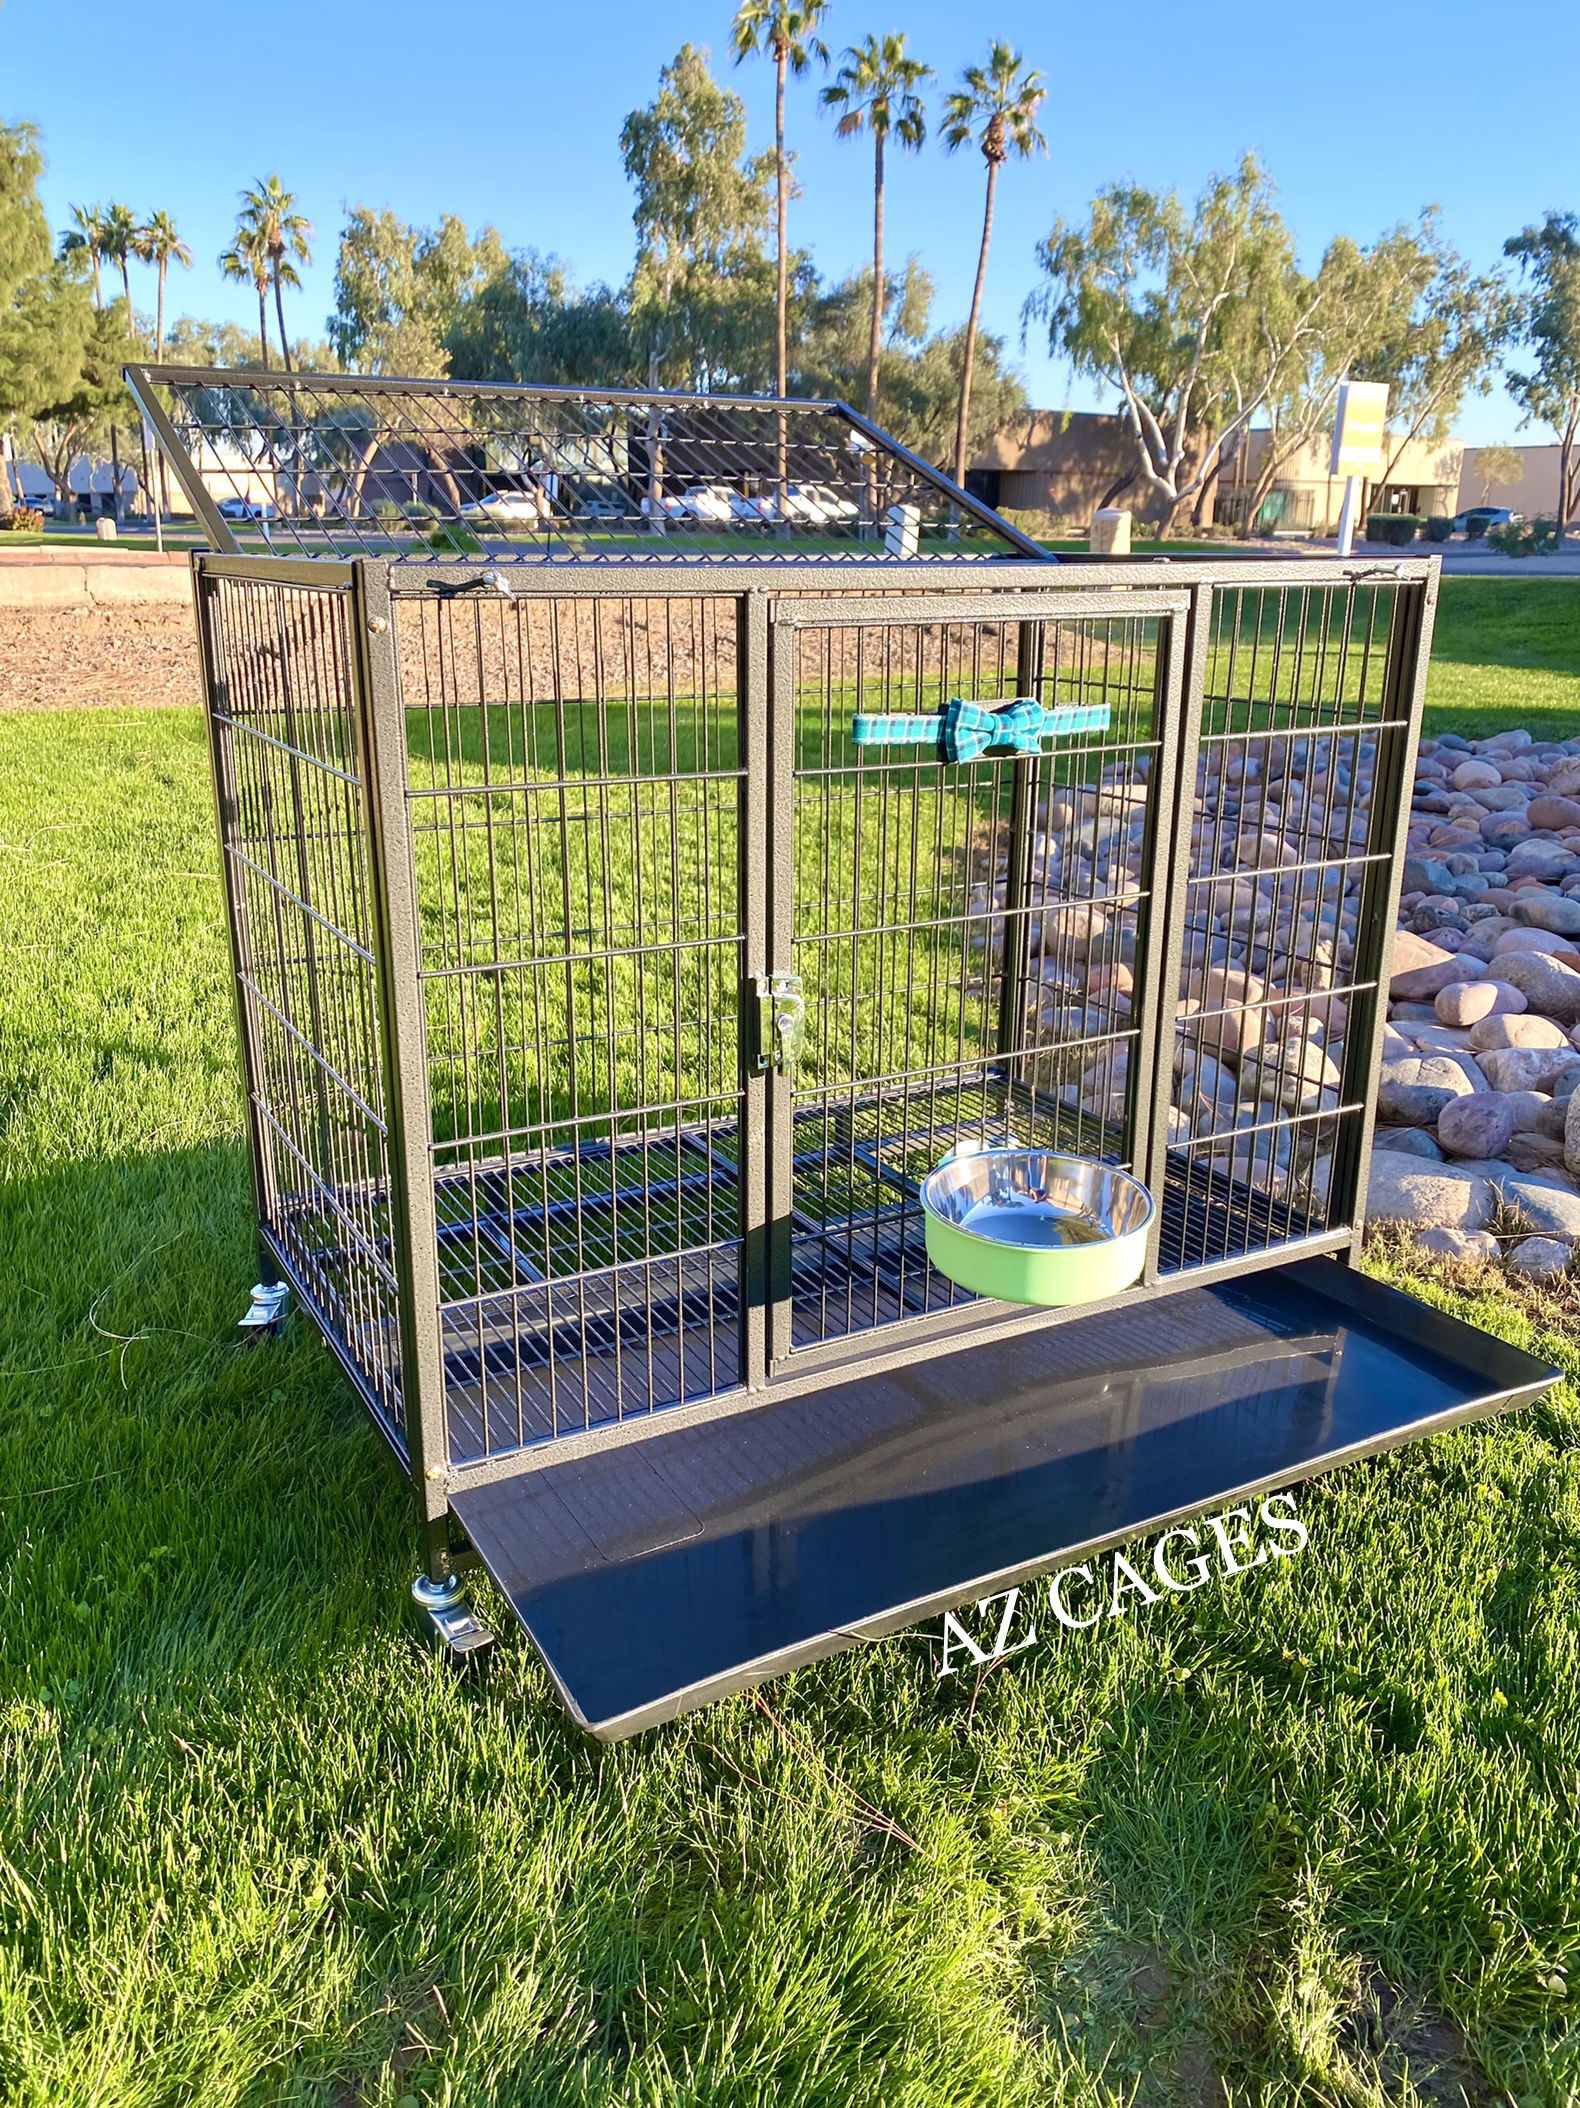 Brandnew HD Dog Kennel Crate Cage W/ Tray & Casters 🐶🐶 Dimensions: 37”L X 23”W X 30”H ✅ 🥳 🎁